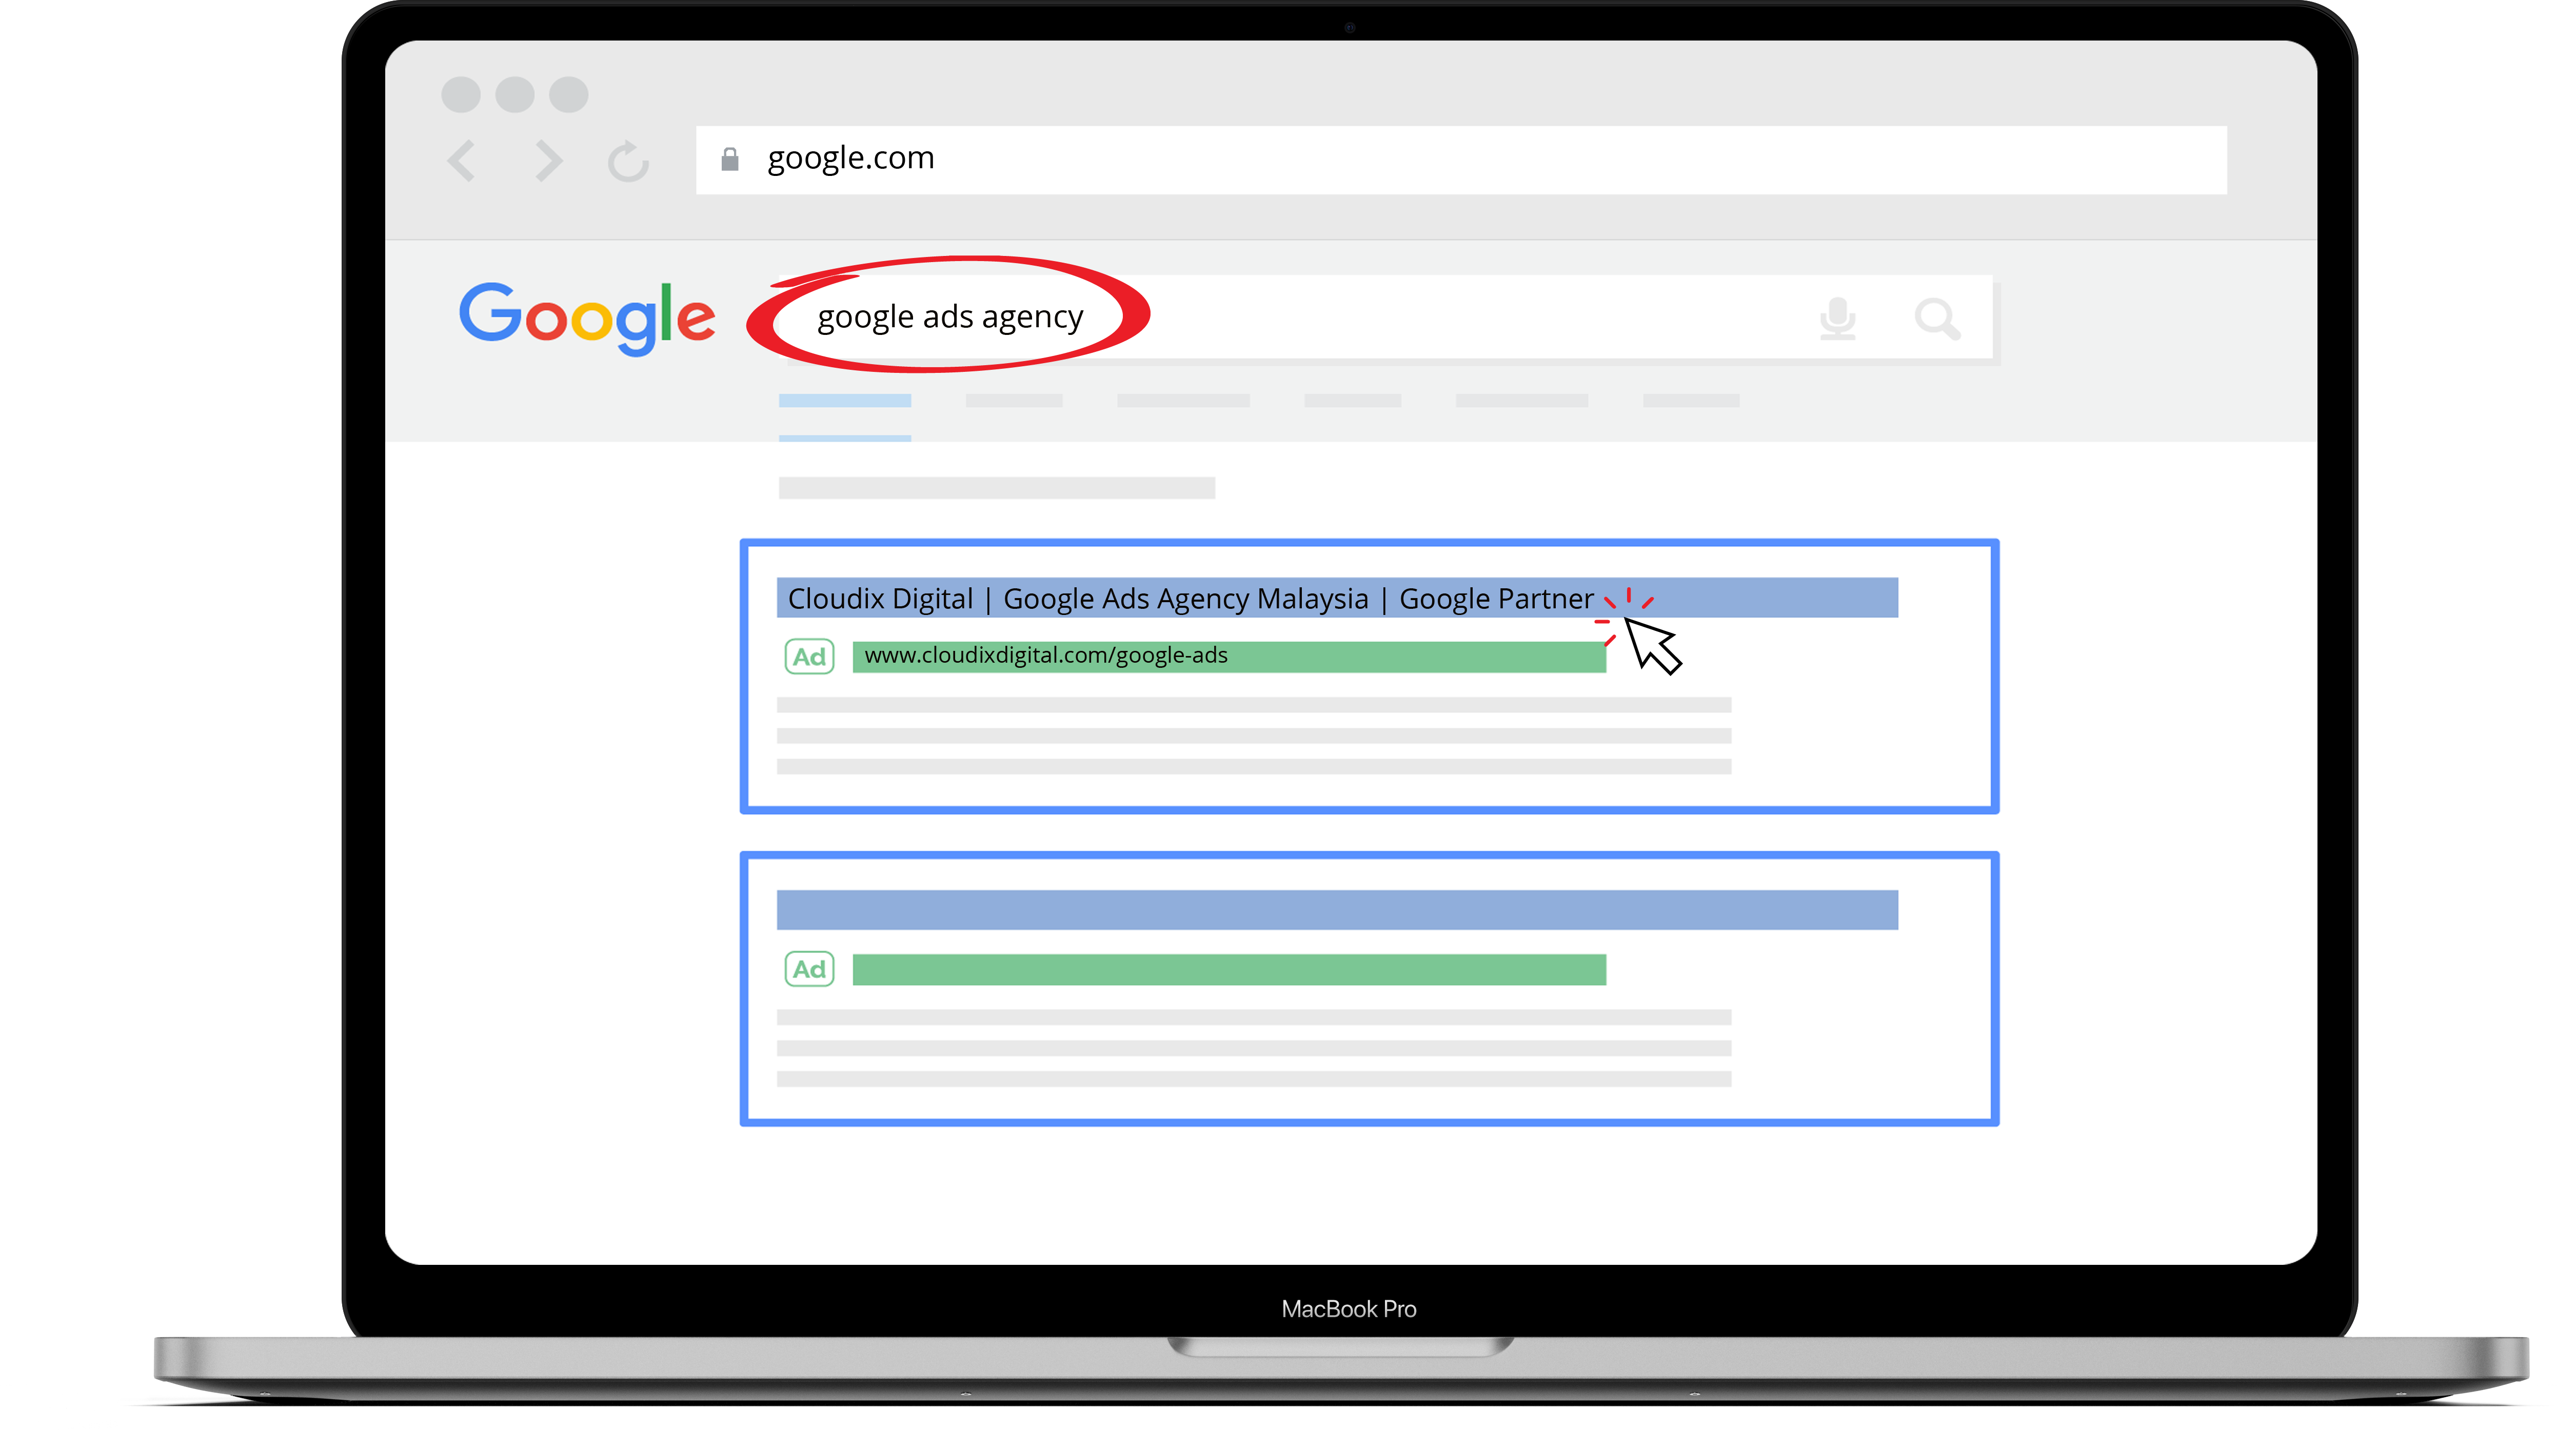 google ads agency search result